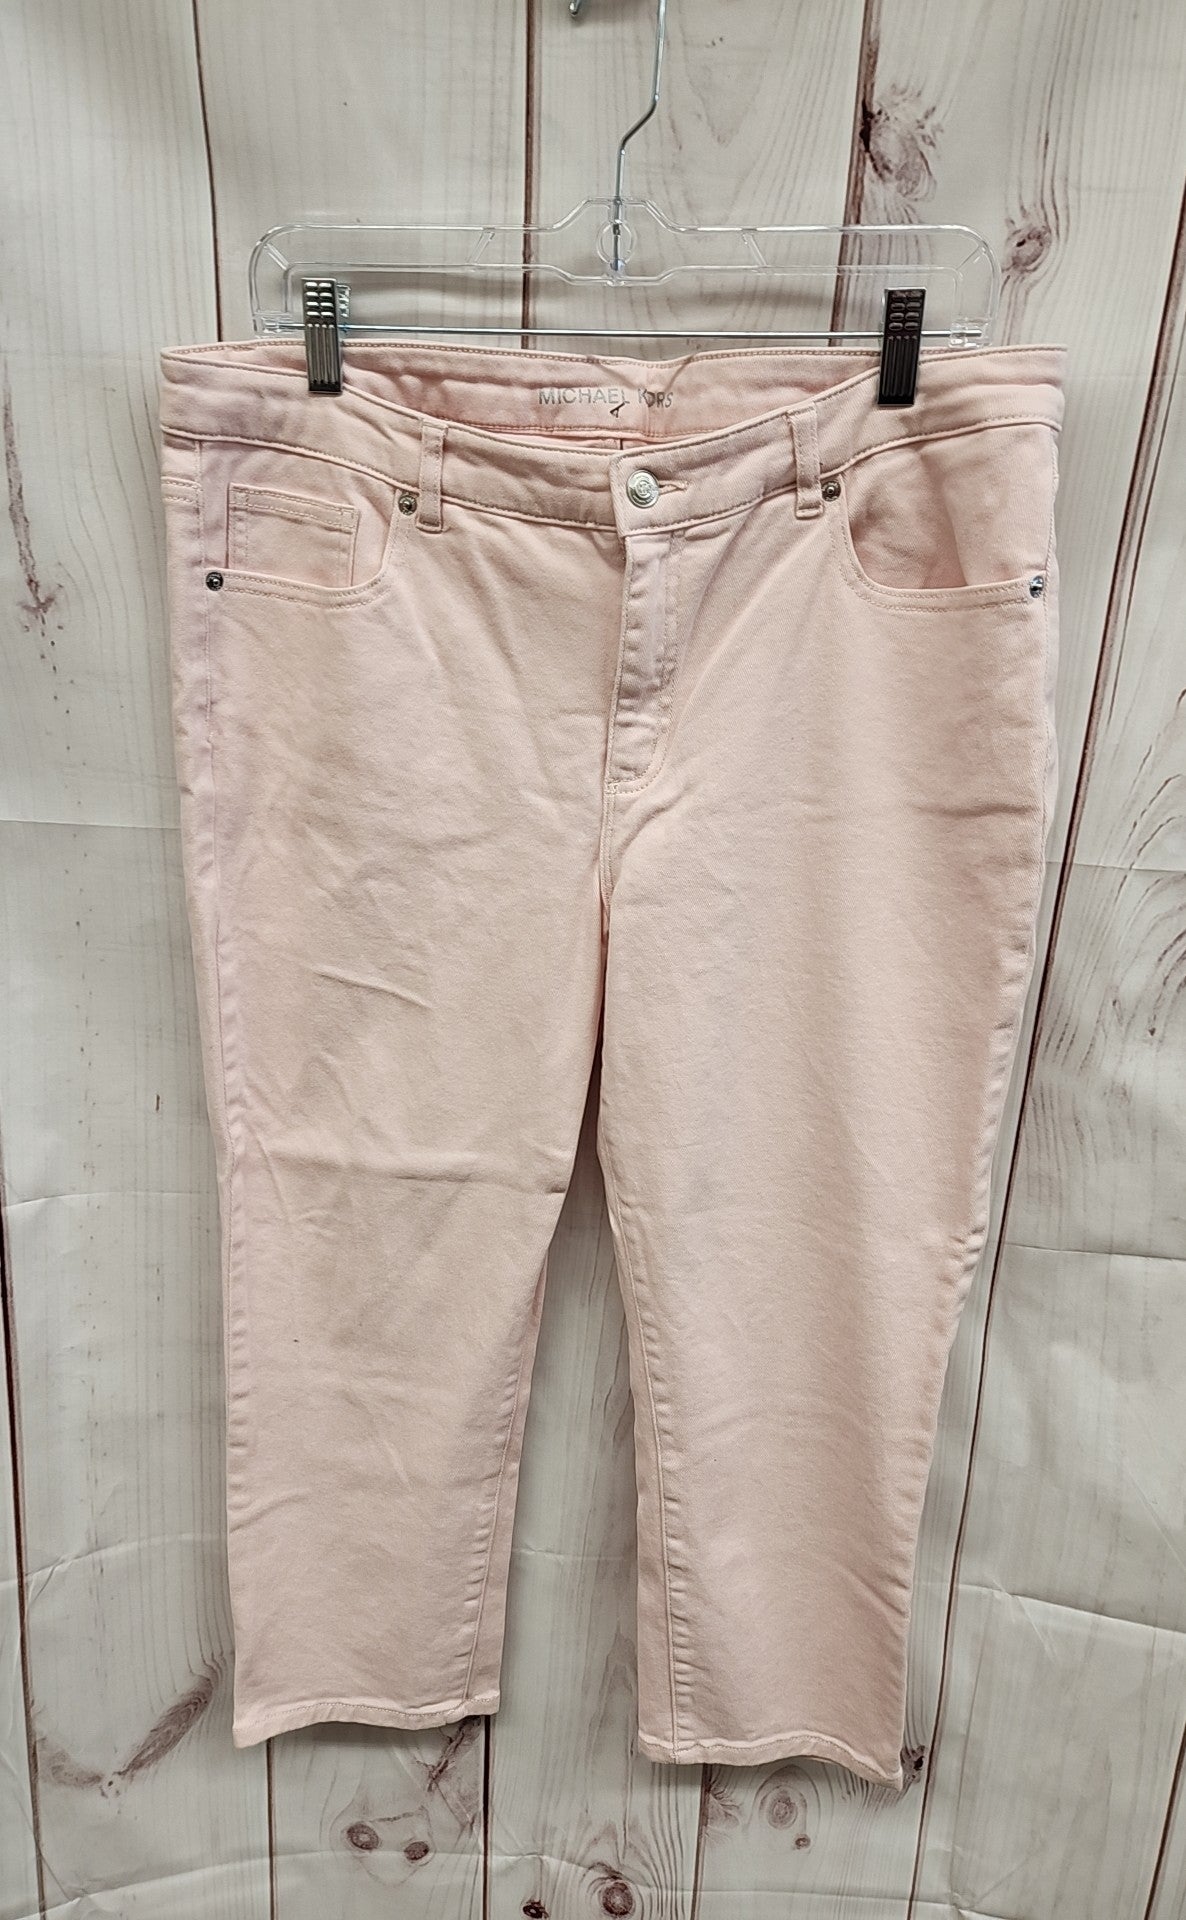 Michael Kors Women's Size 31 (11-12) Cropped Skinny Pink Jeans